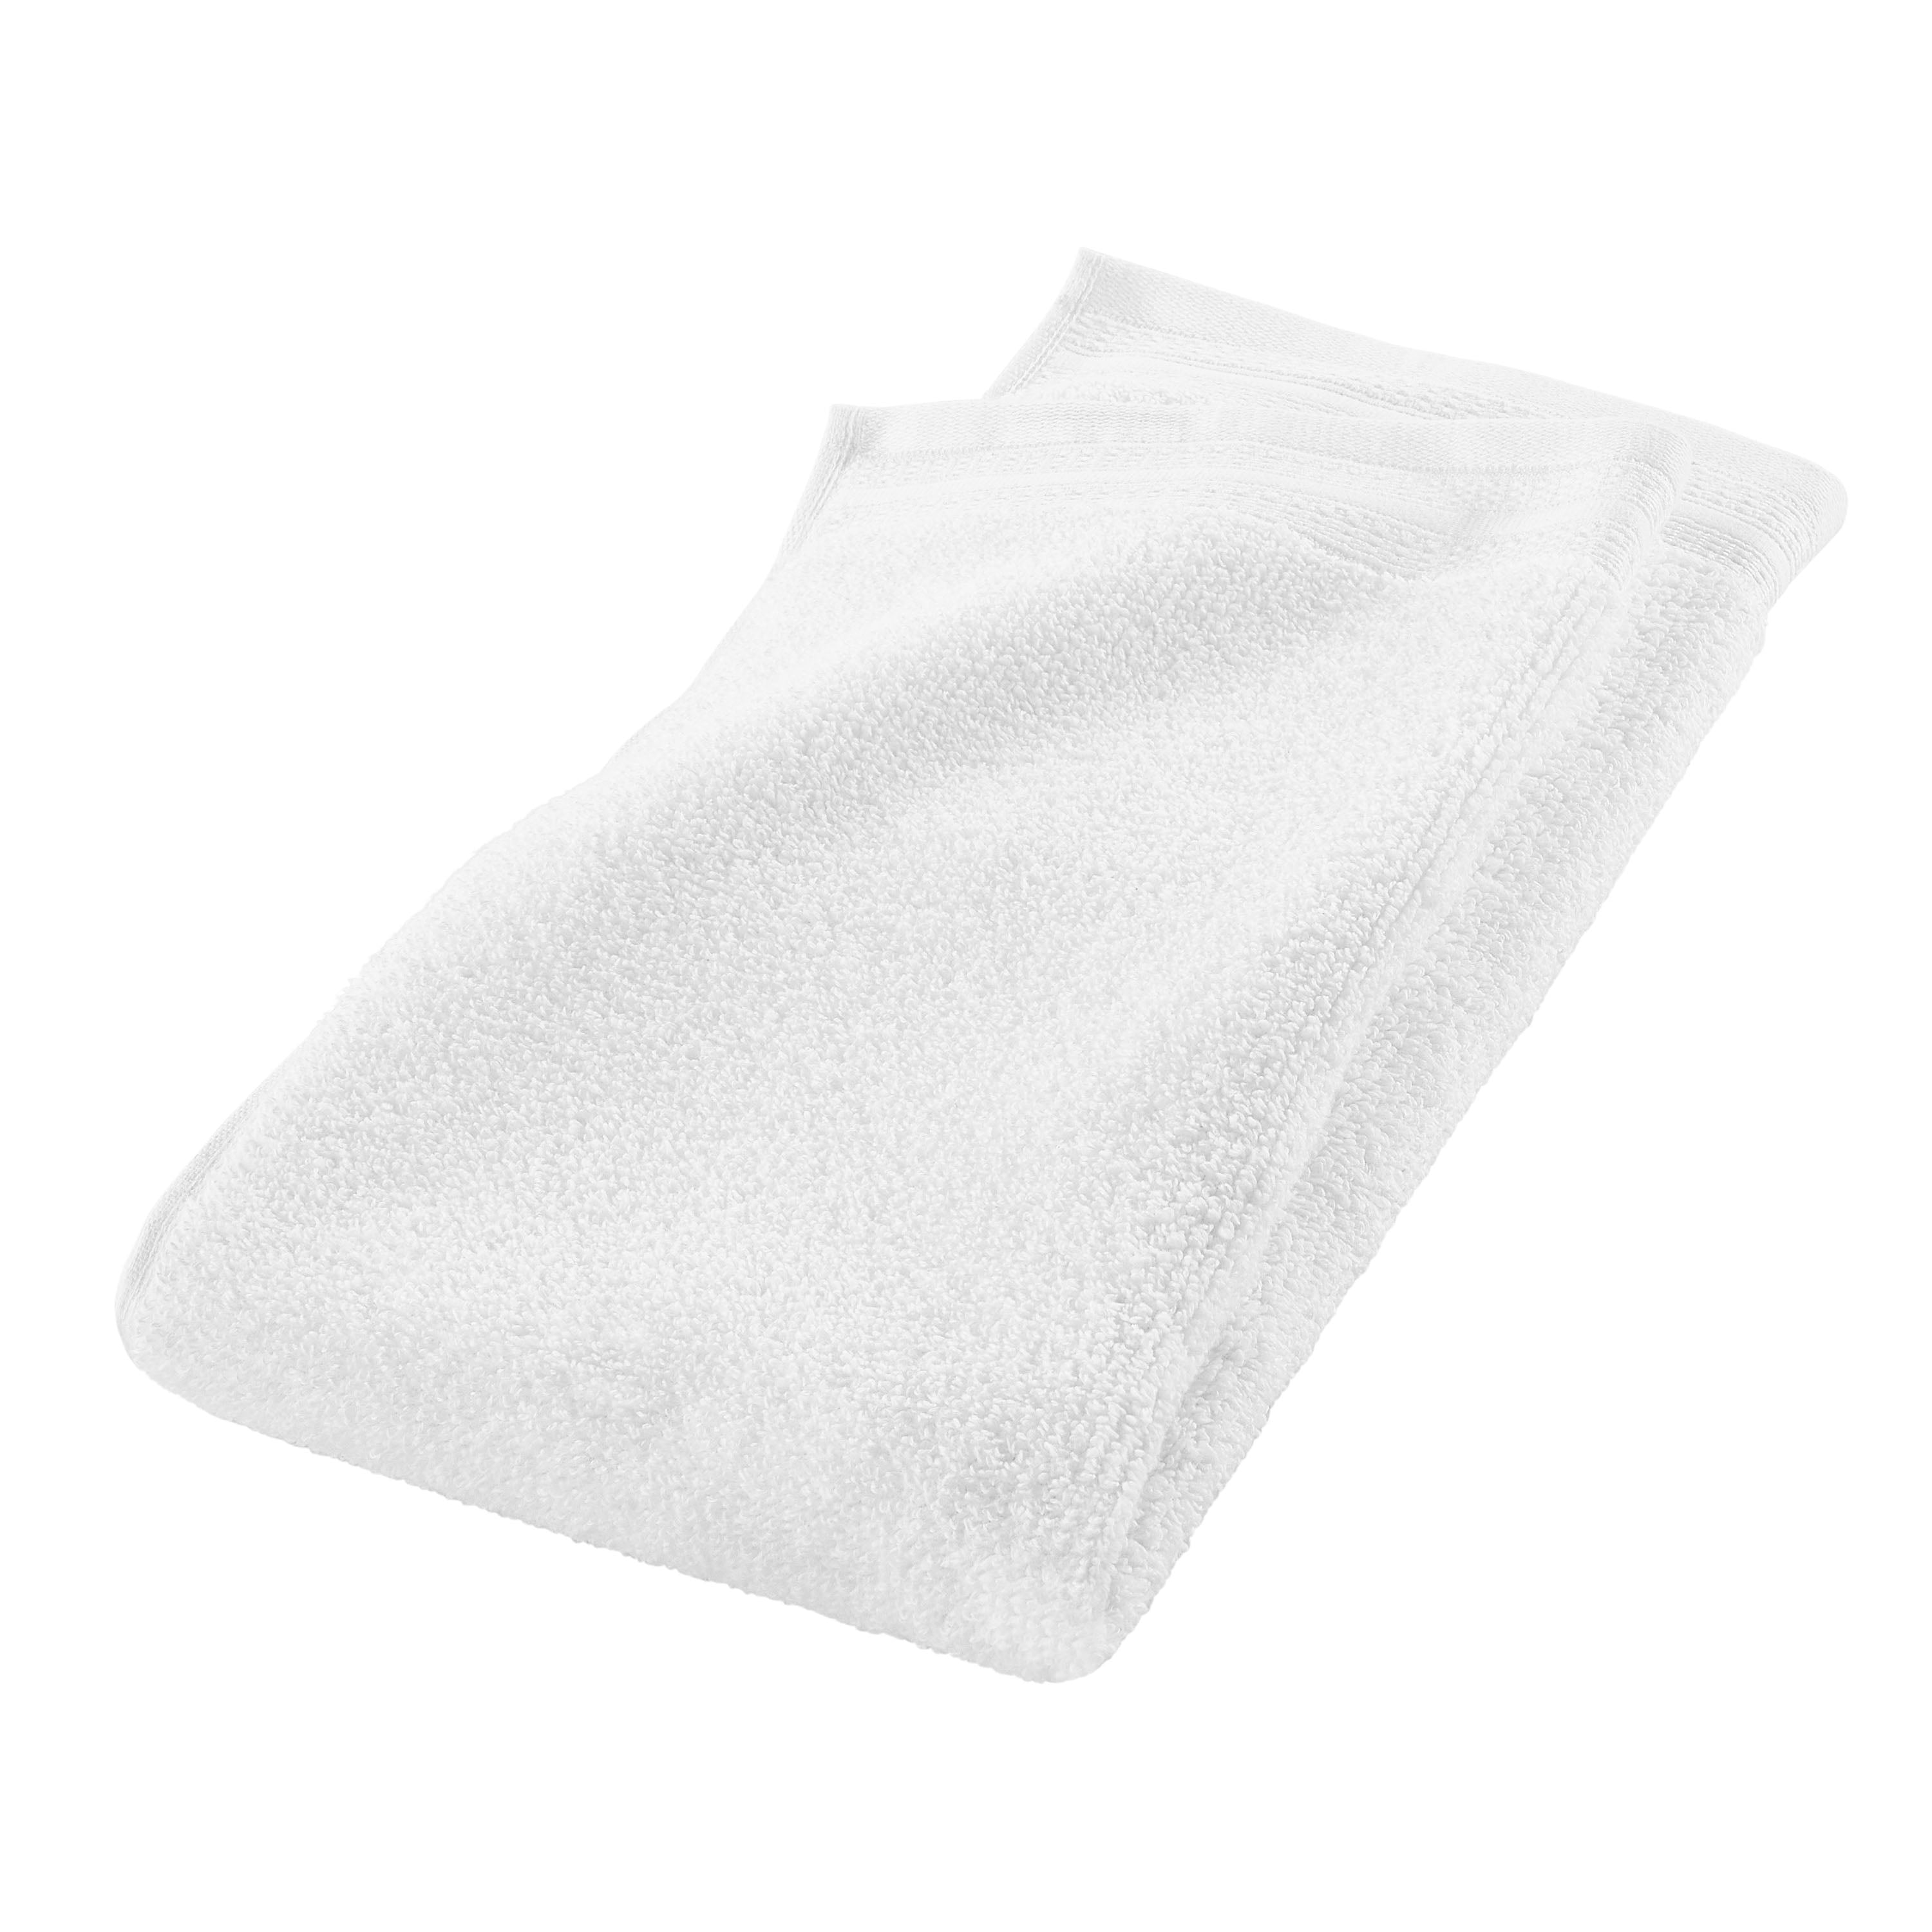 Hotel Hand Towels. In the bath linen section, hand towels…, by Ally Zheng